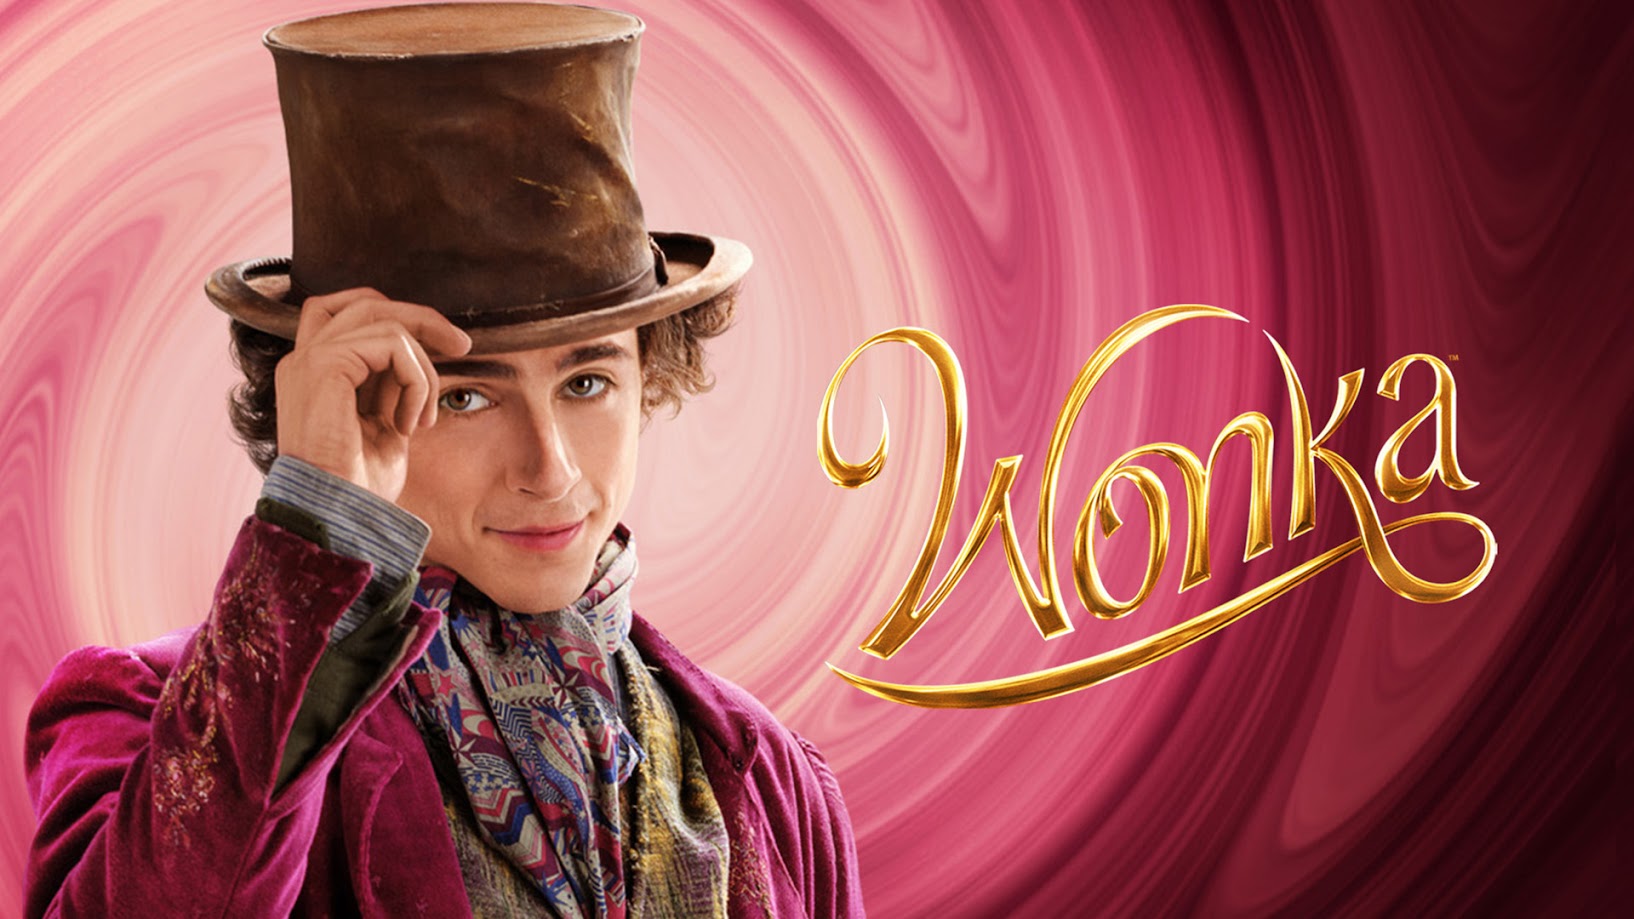 The wonka frame Tom designed has a classic period appropriate shape which would have been at the height of fashion at the time